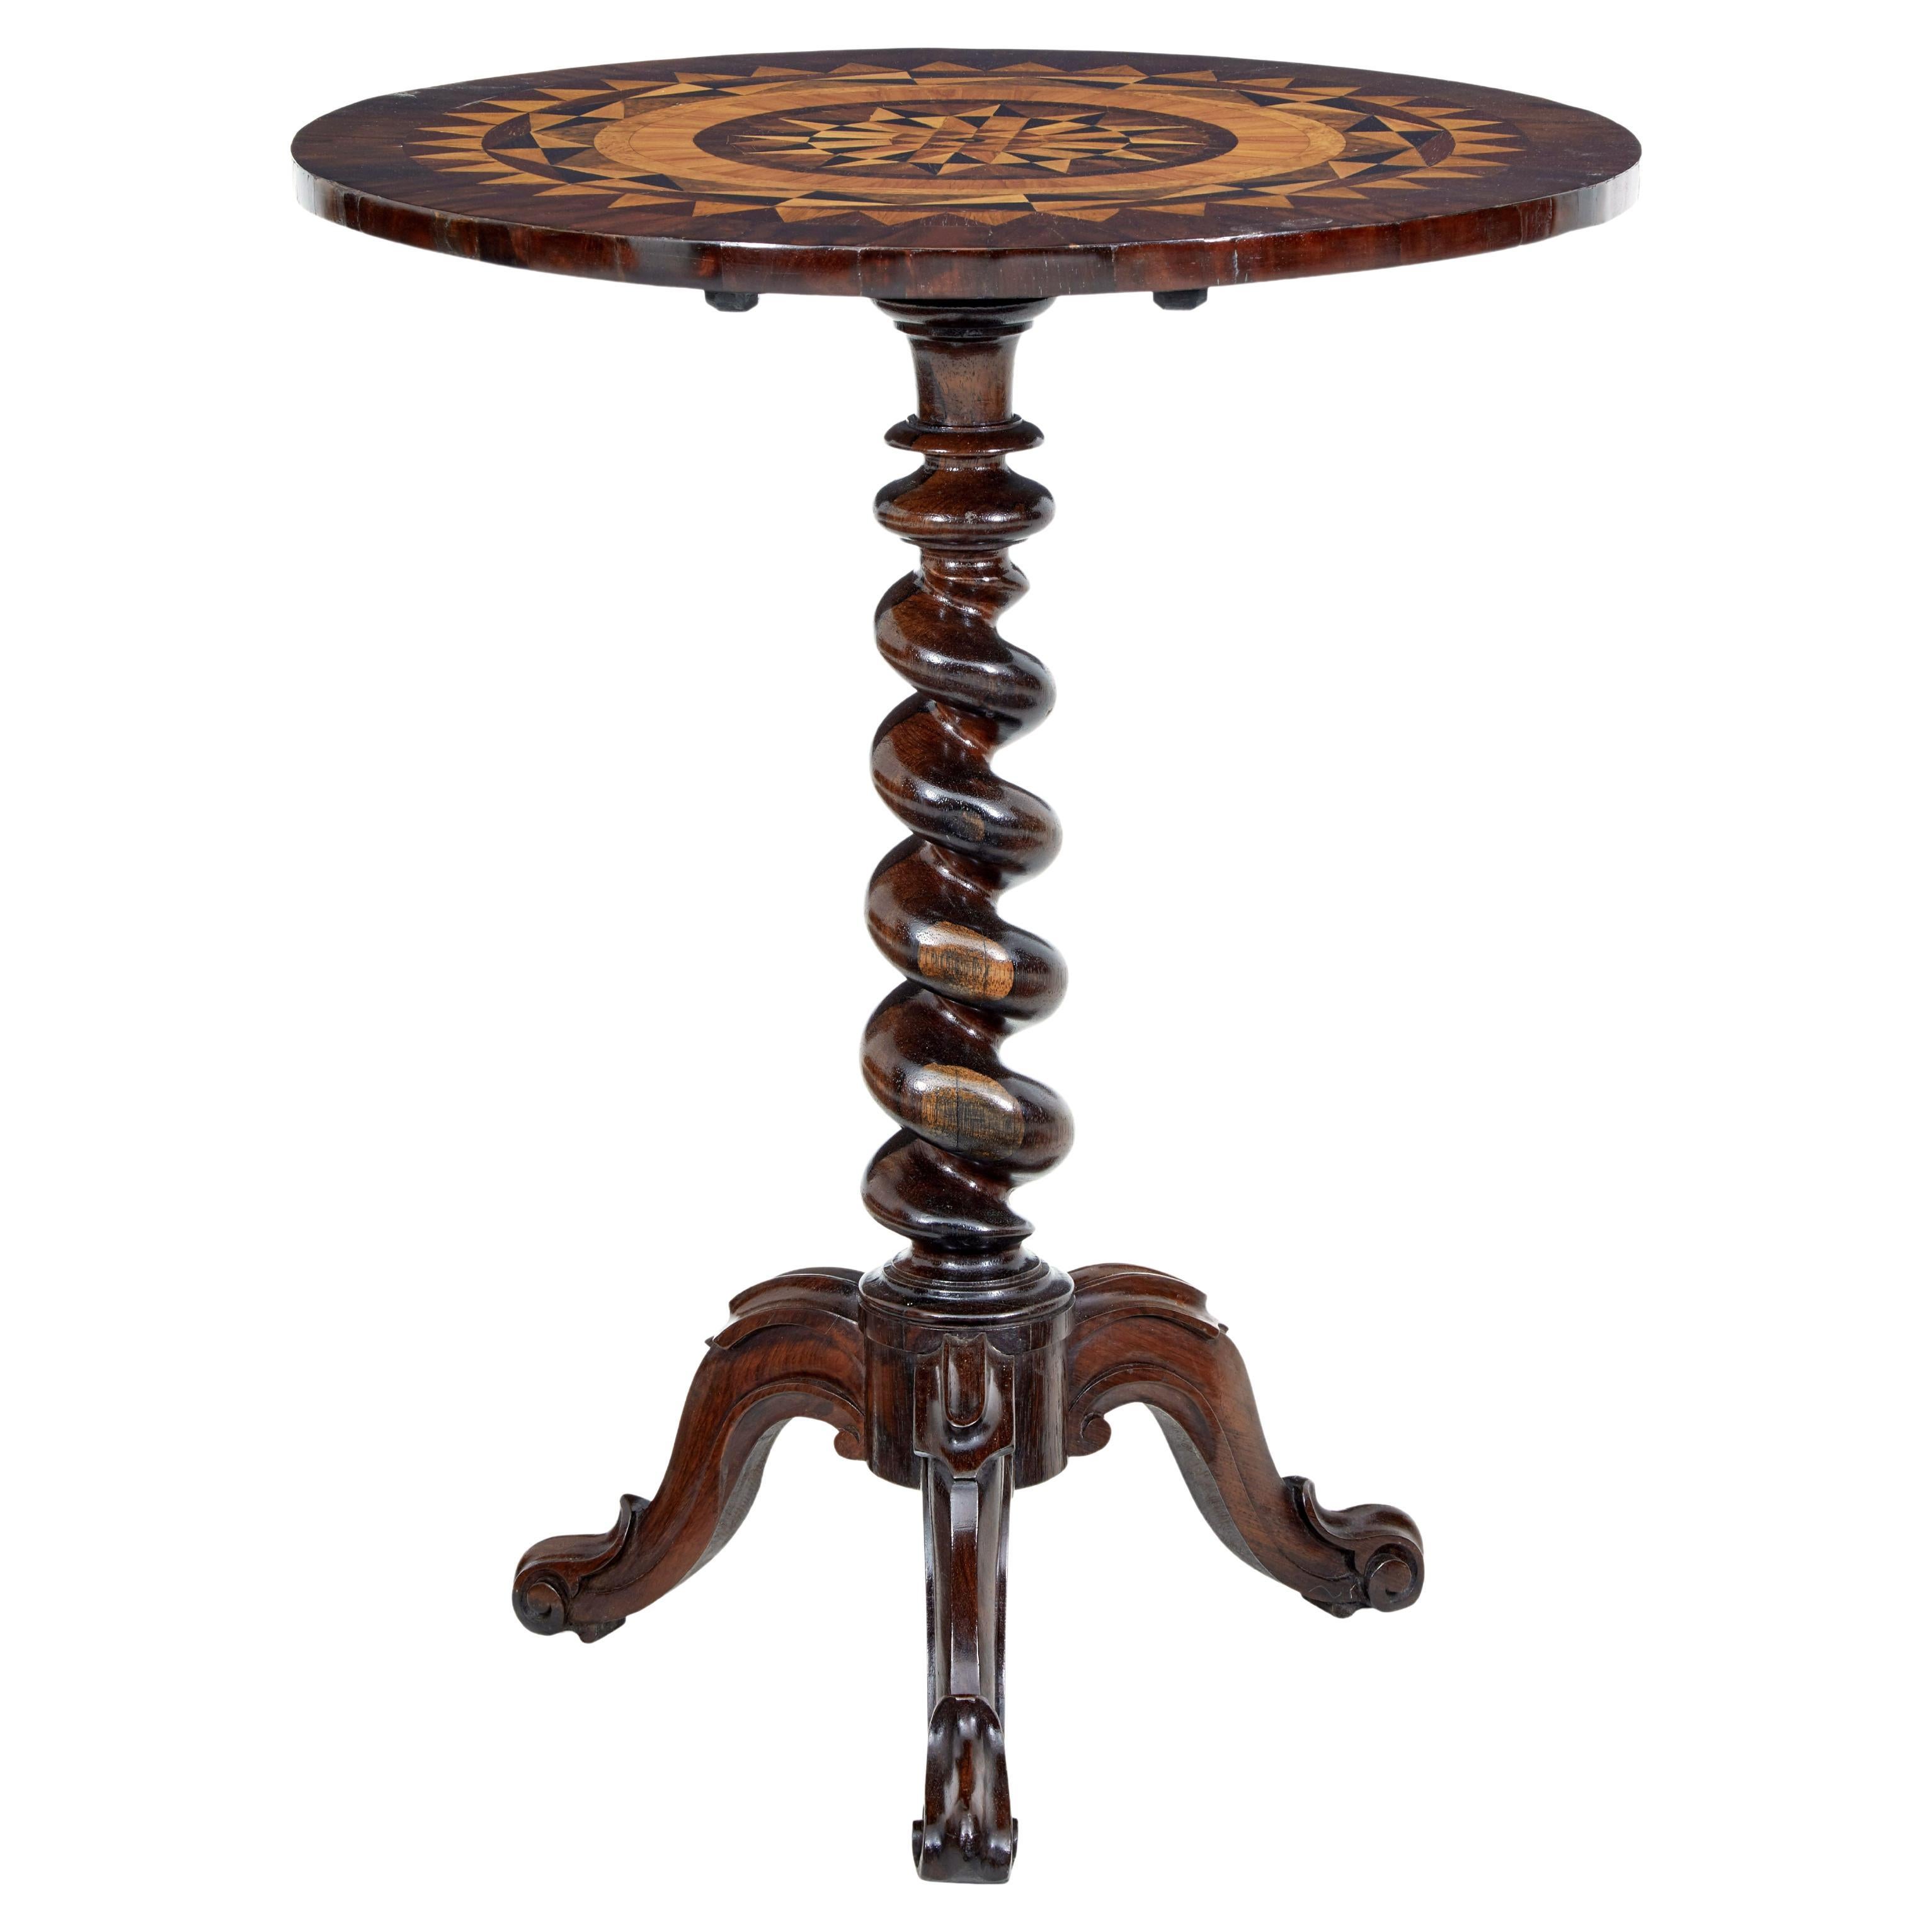 Early Victorian 19th century walnut inlaid tilt top occasional table